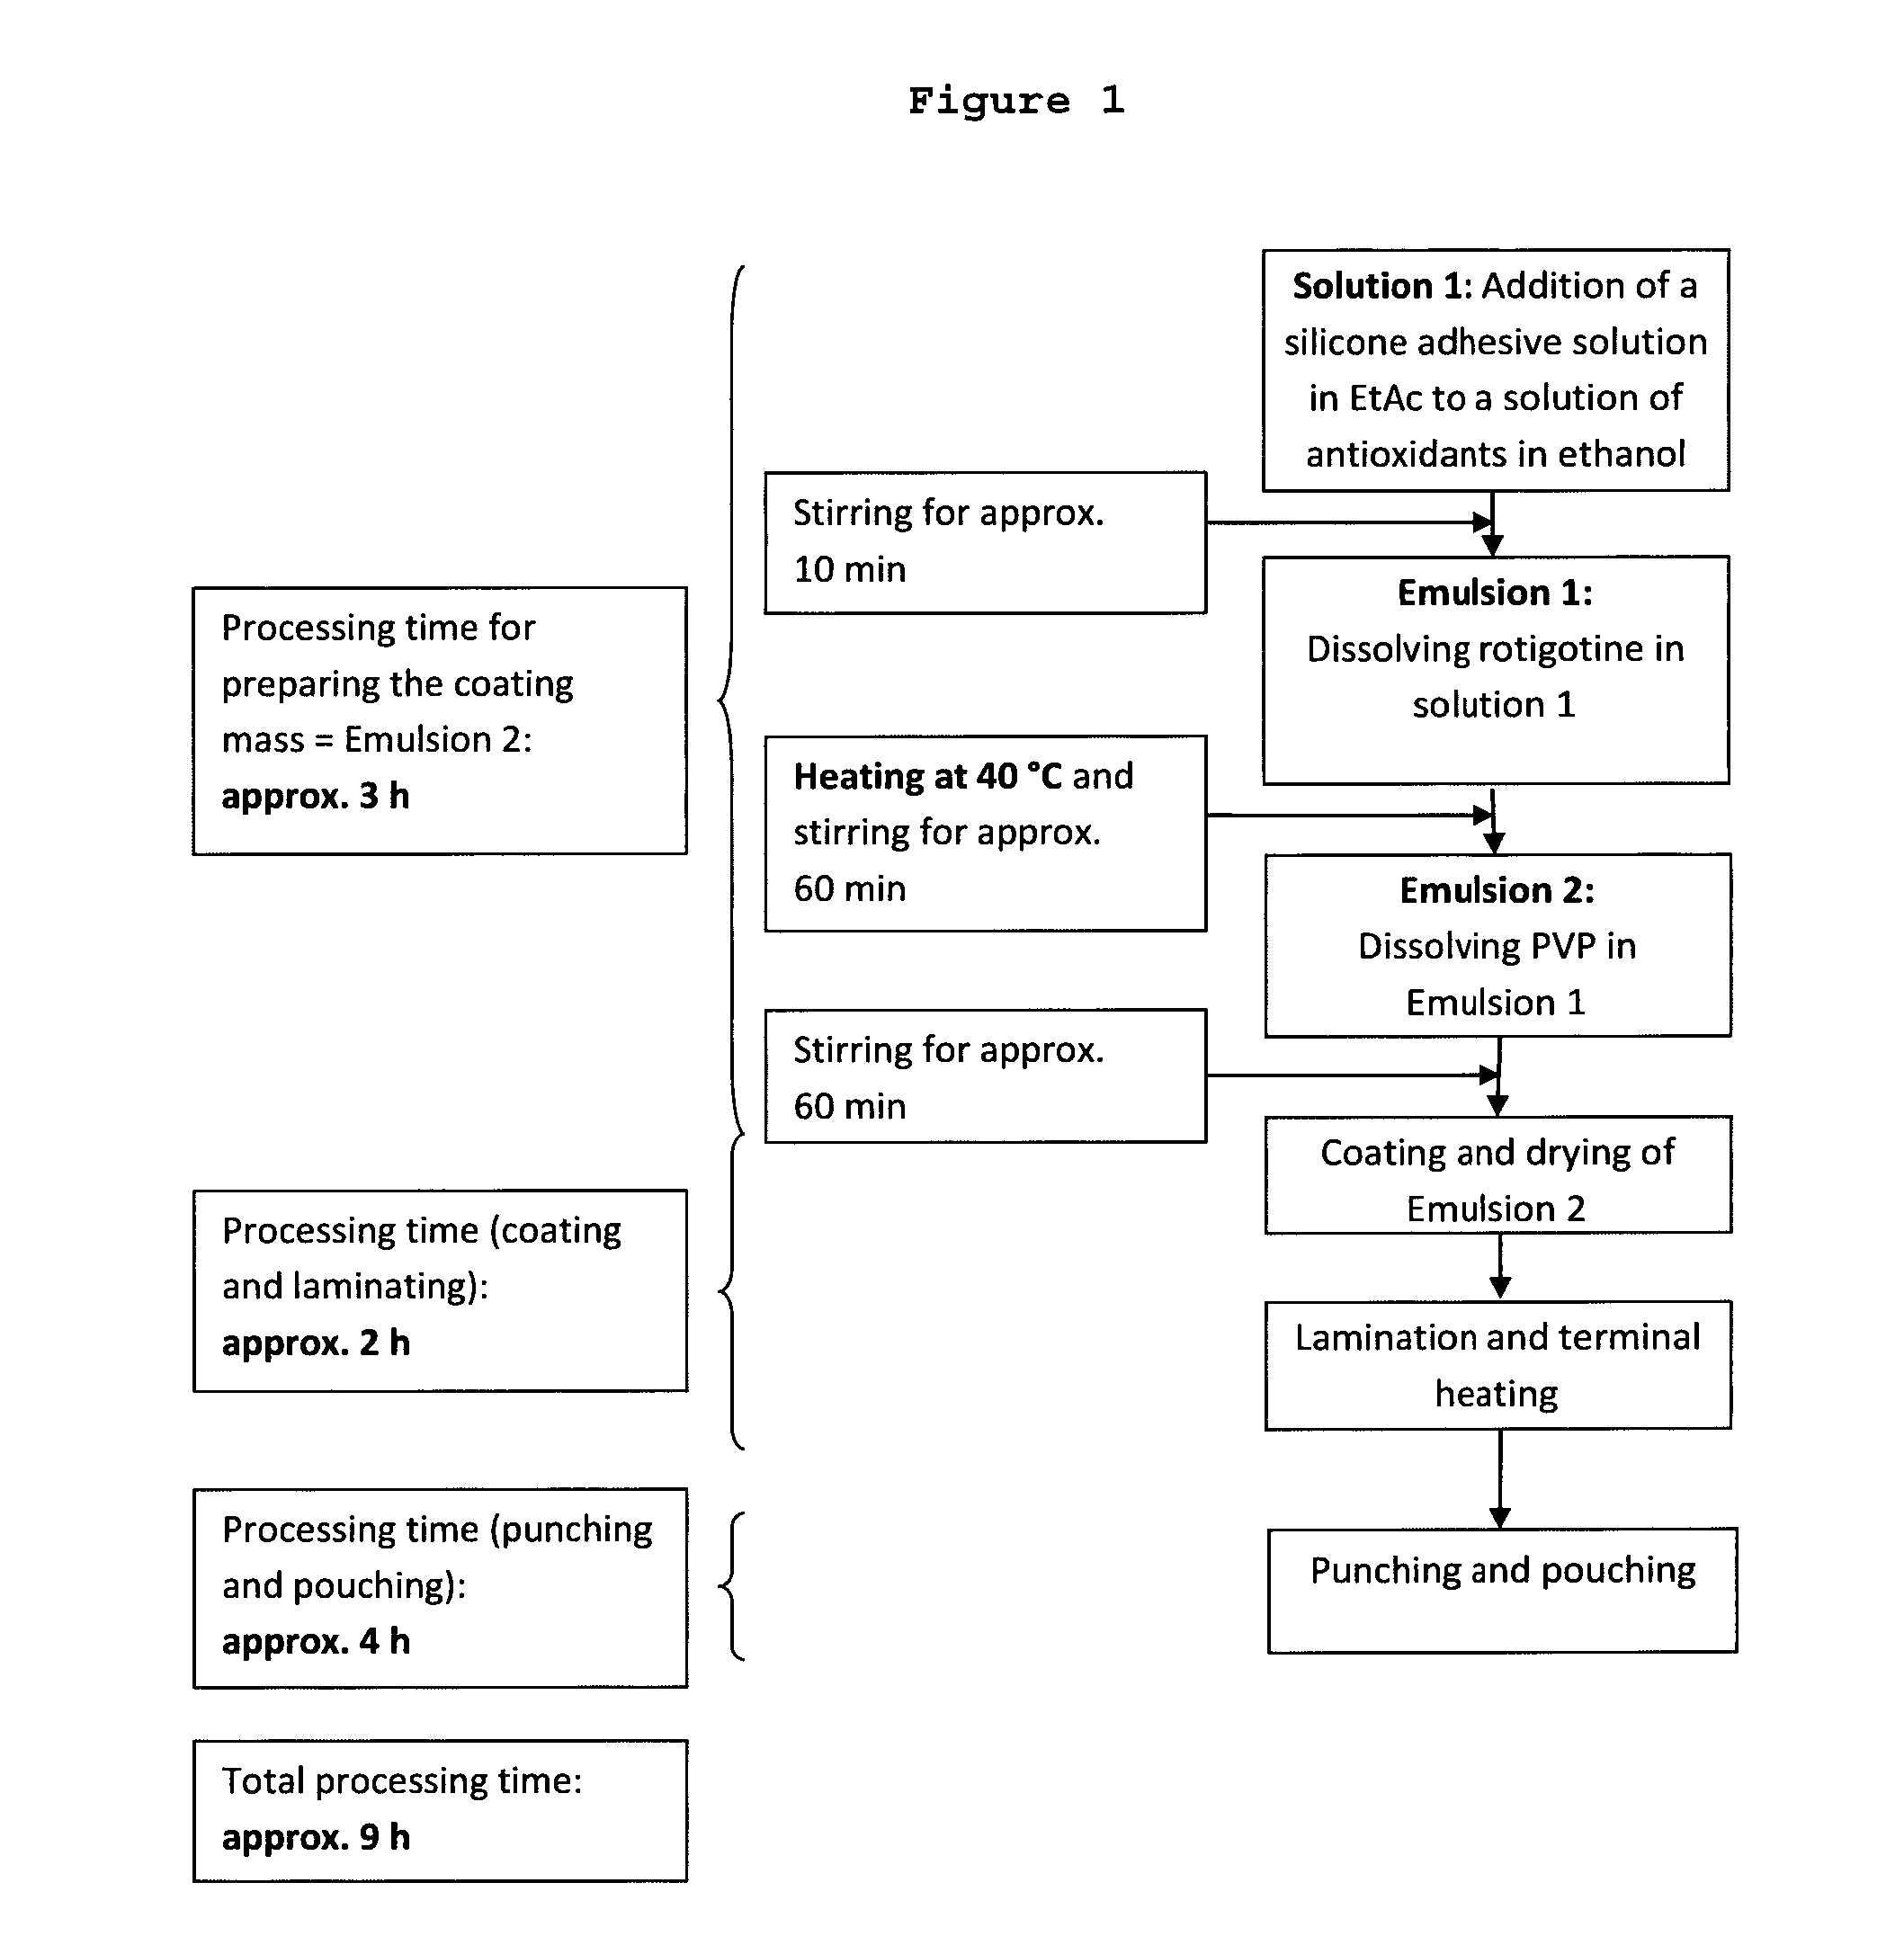 Multi-Day Patch for the Transdermal Administration of Rotigotine